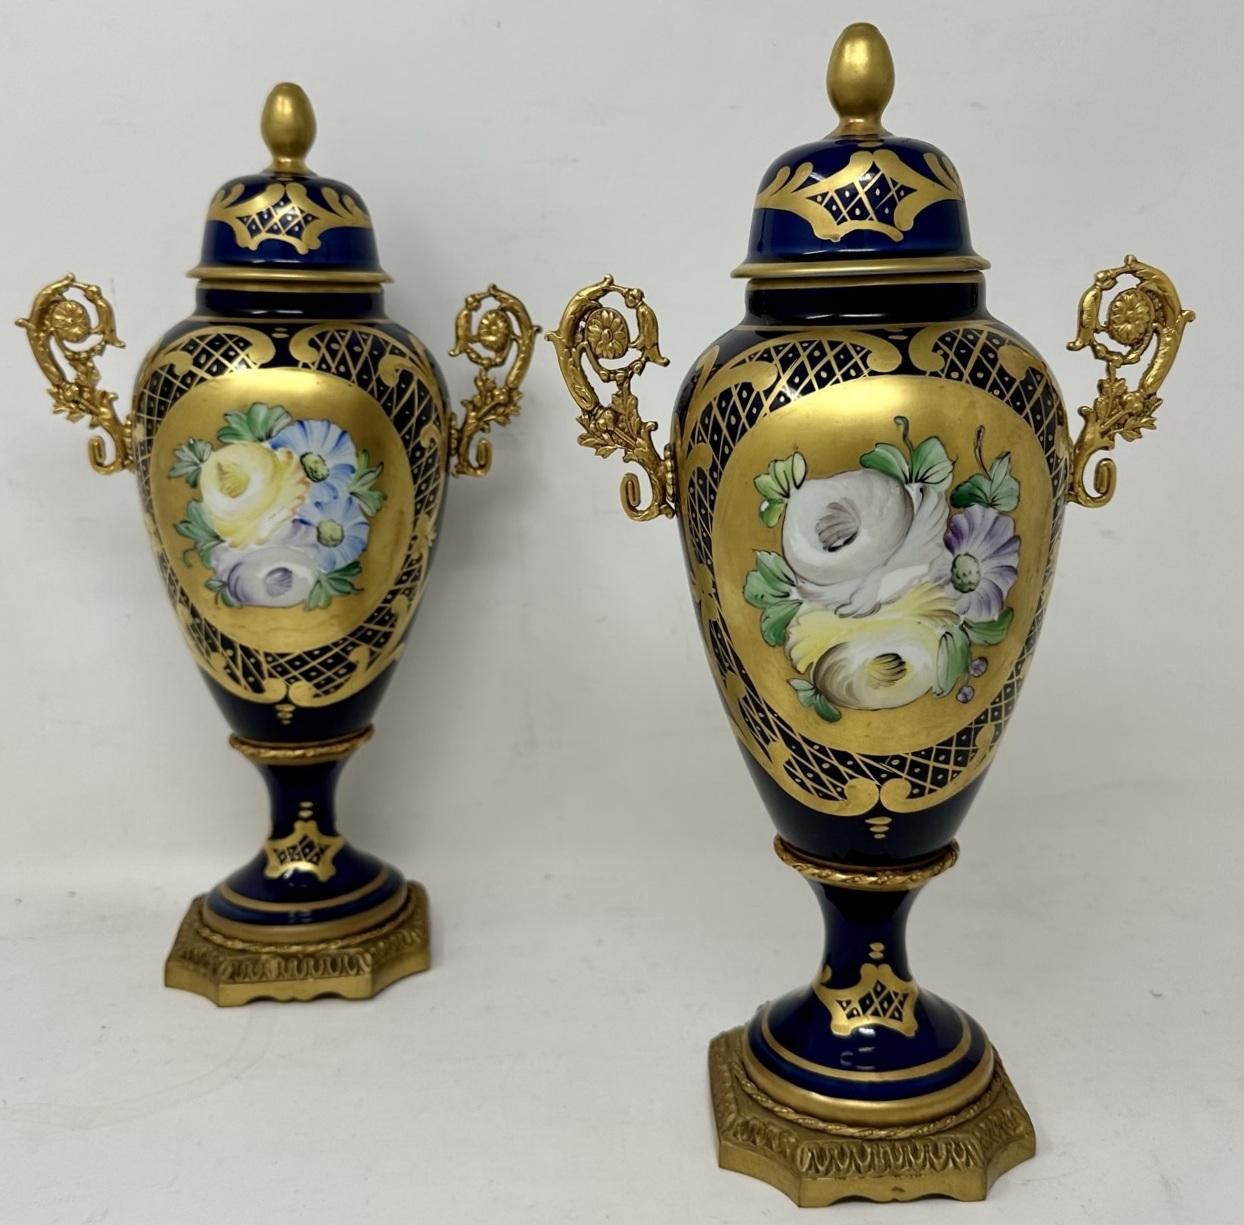 Late Victorian Antique Pair of French Limoges Porcelain Ormolu Mounted Urns Vases Centerpieces